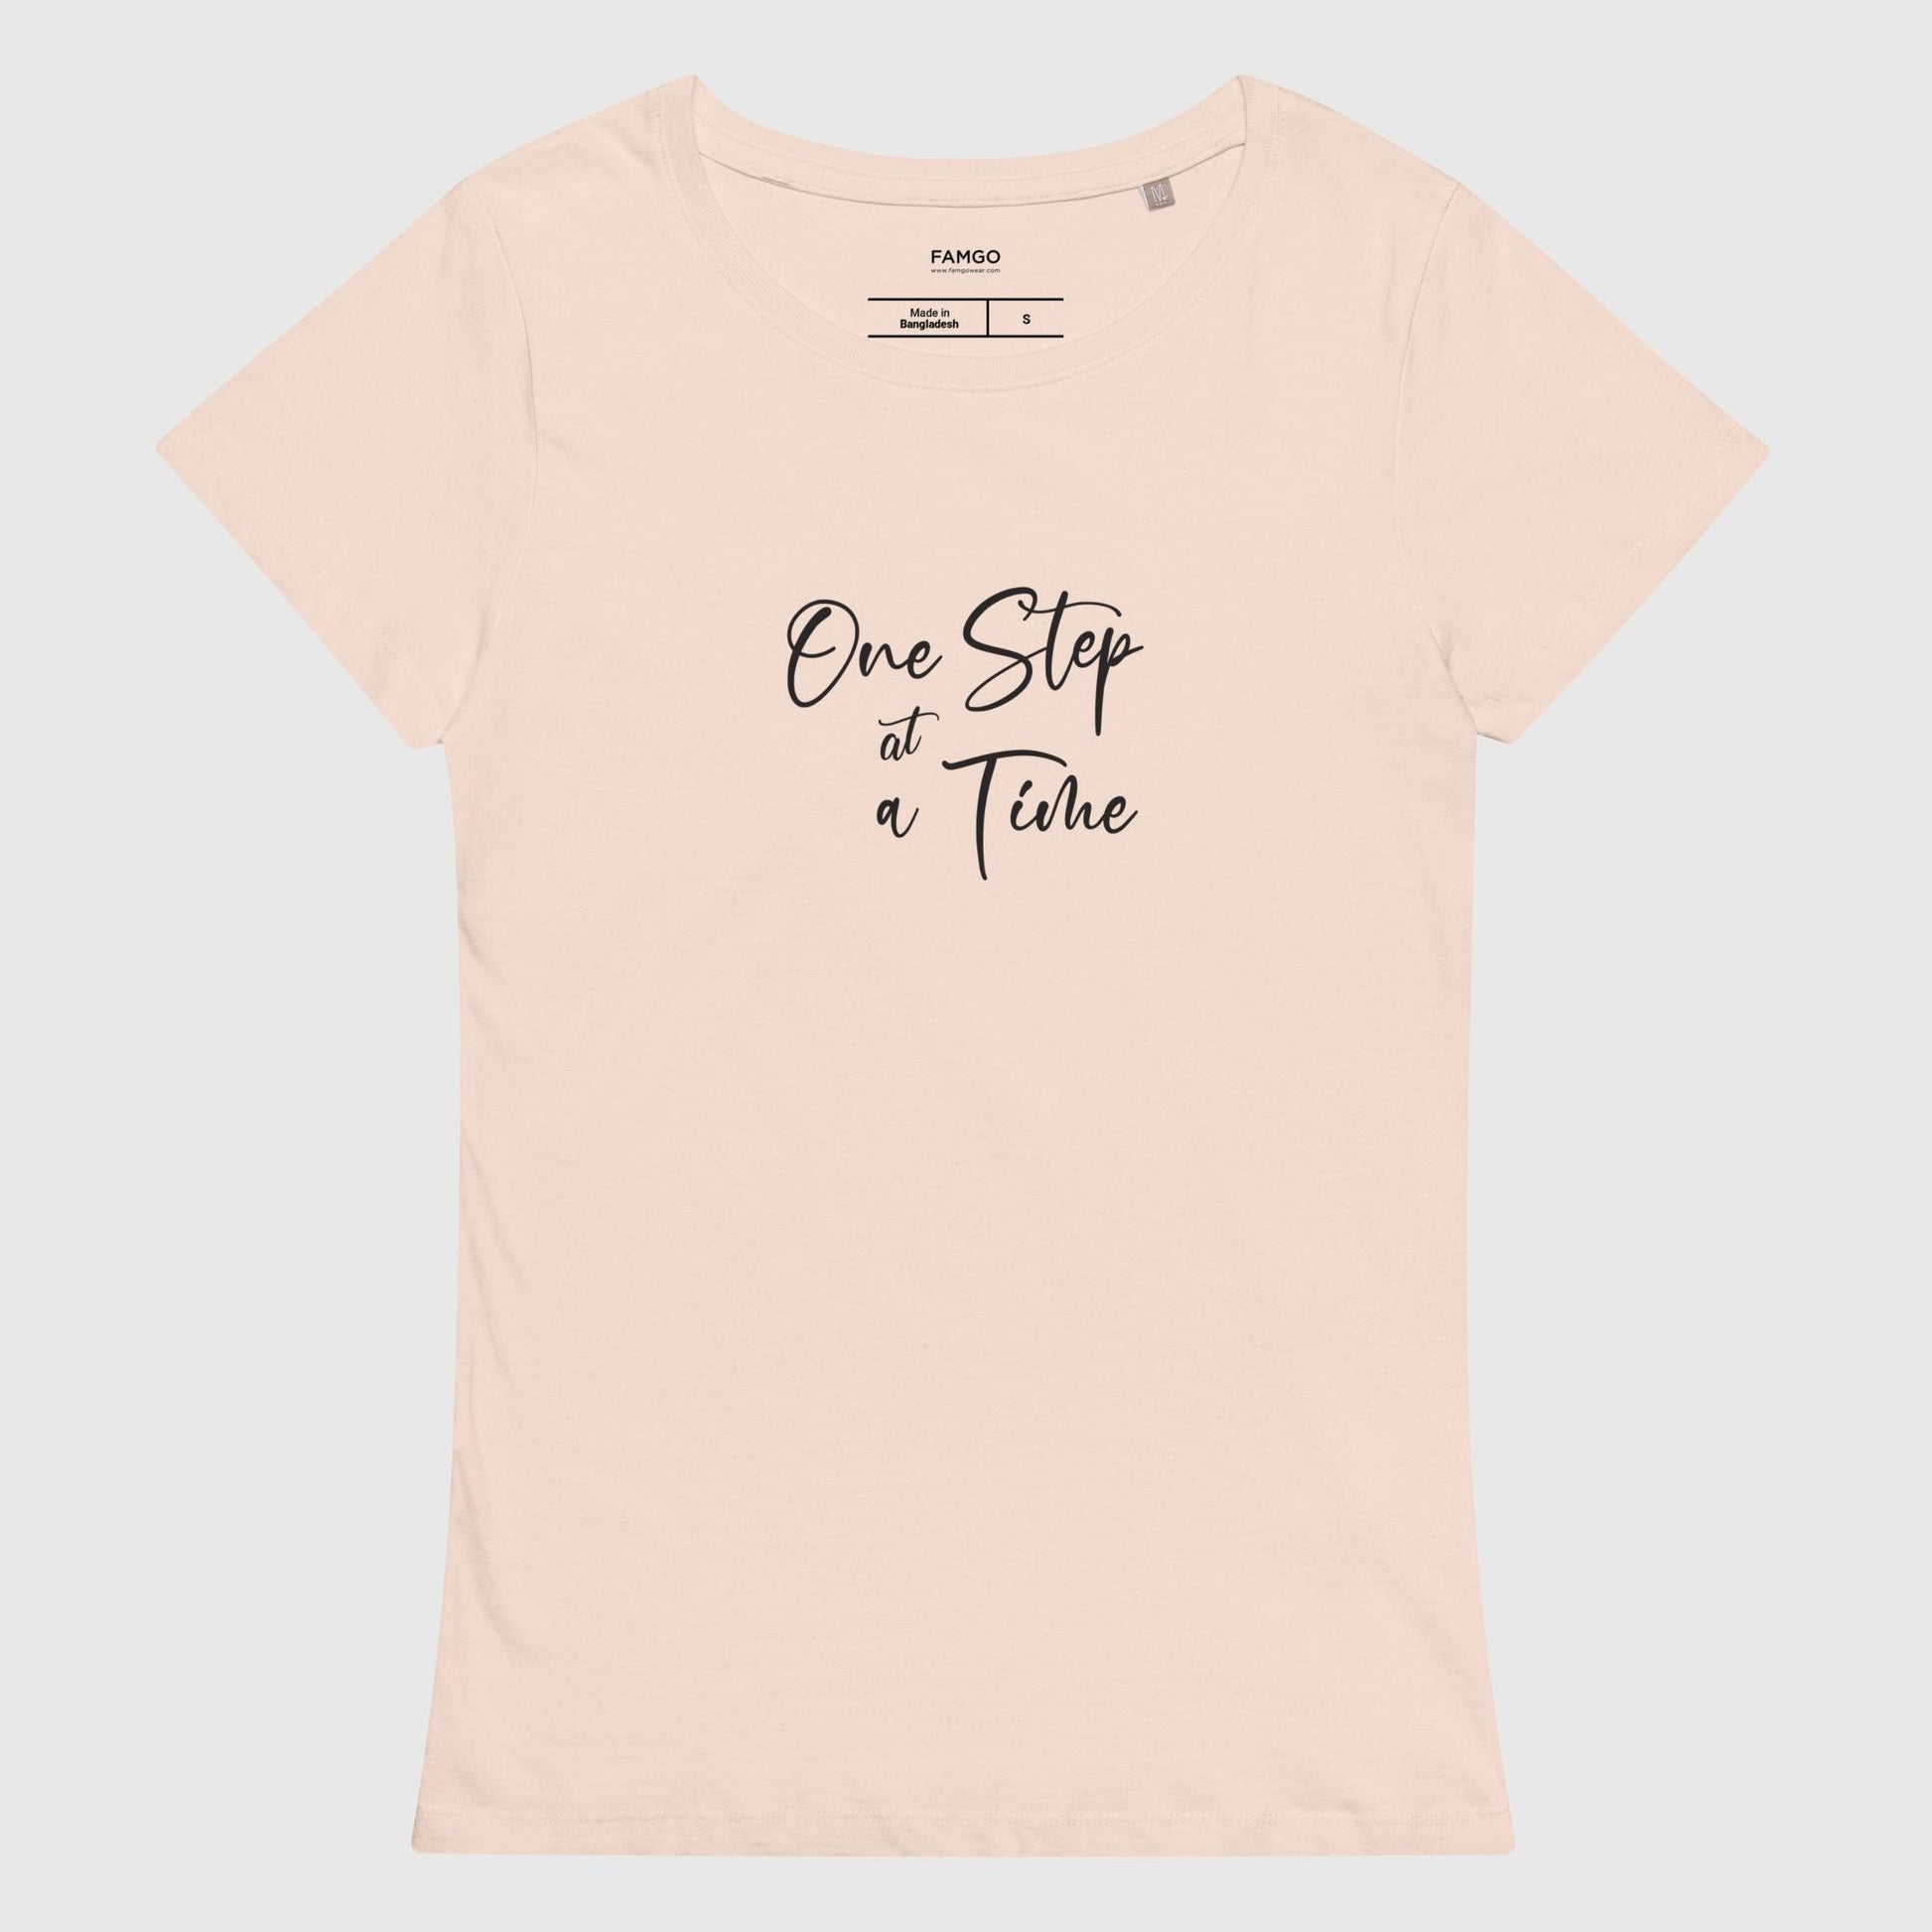 Women's creamy pink organic cotton t-shirt that features the inspirational quote, "One Step At A Time."